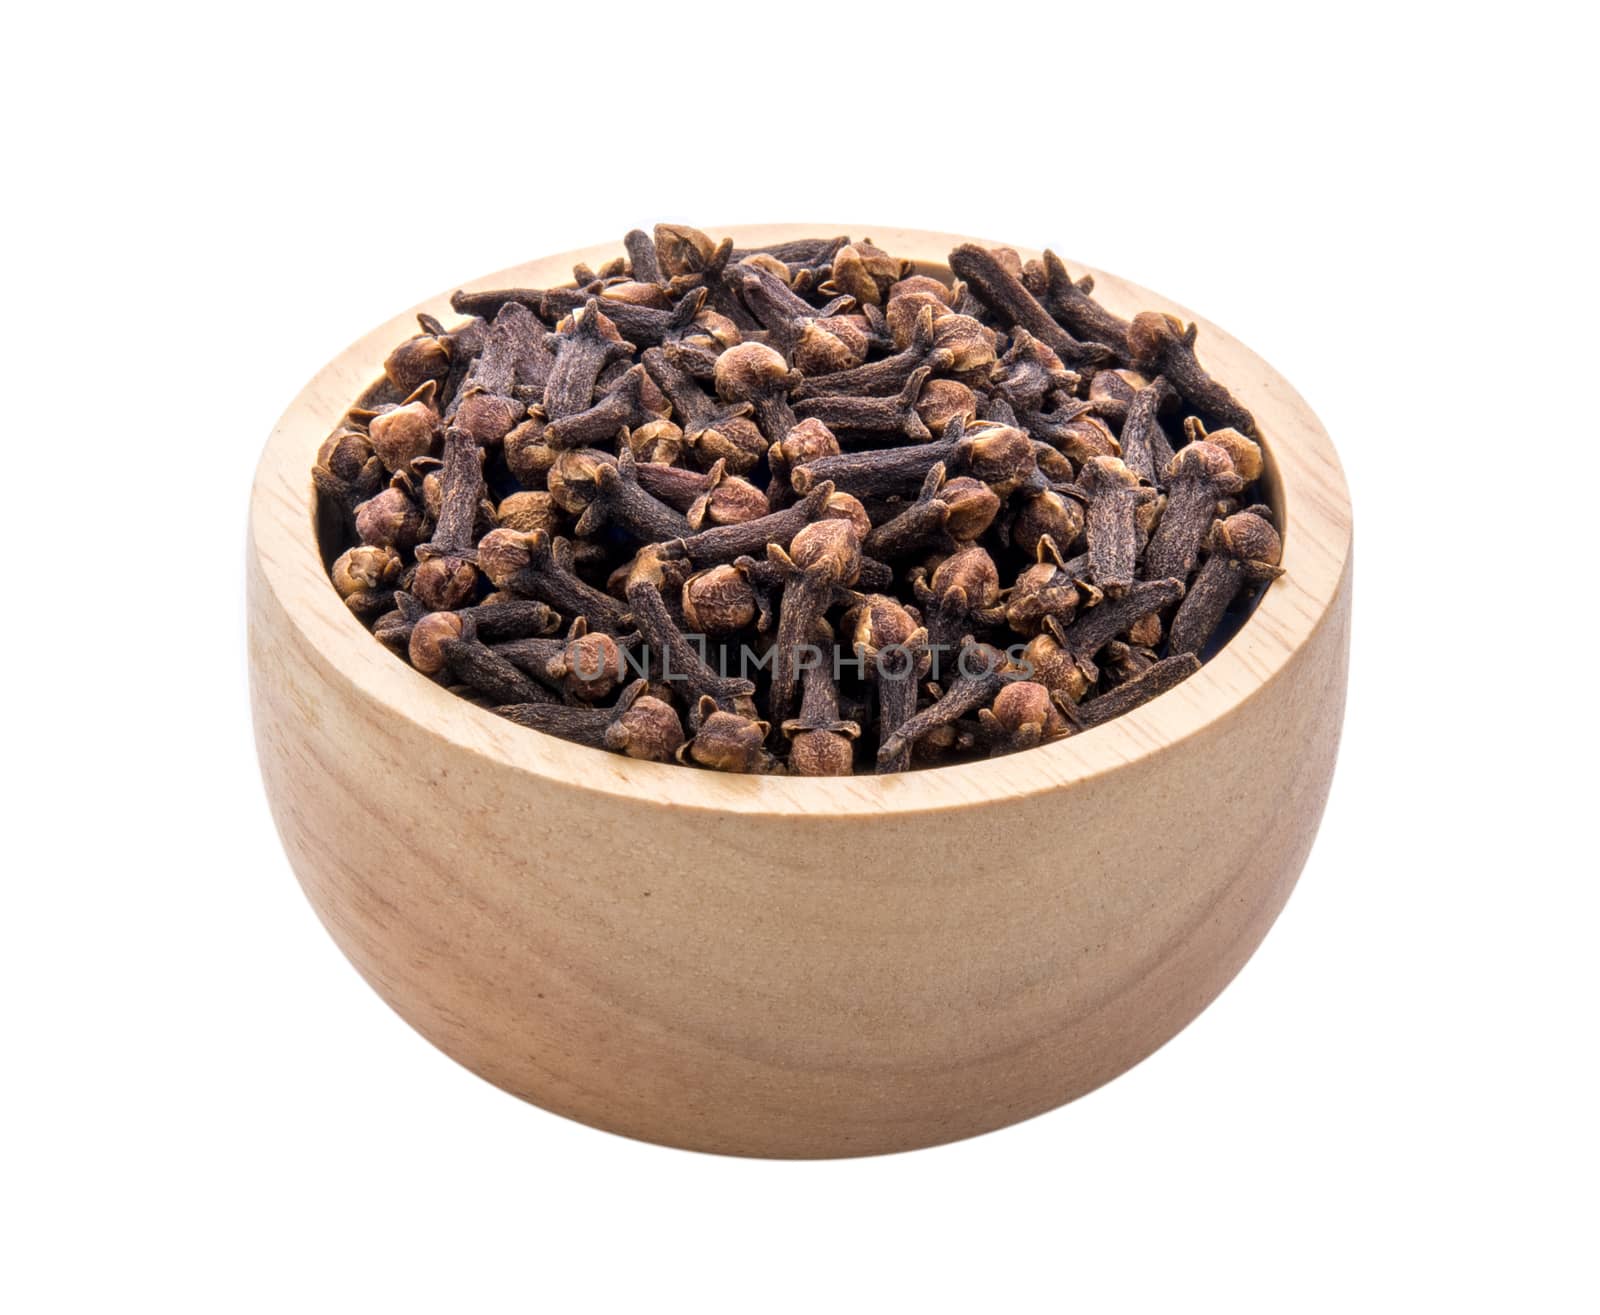 cloves spices in wood bowl on white background 